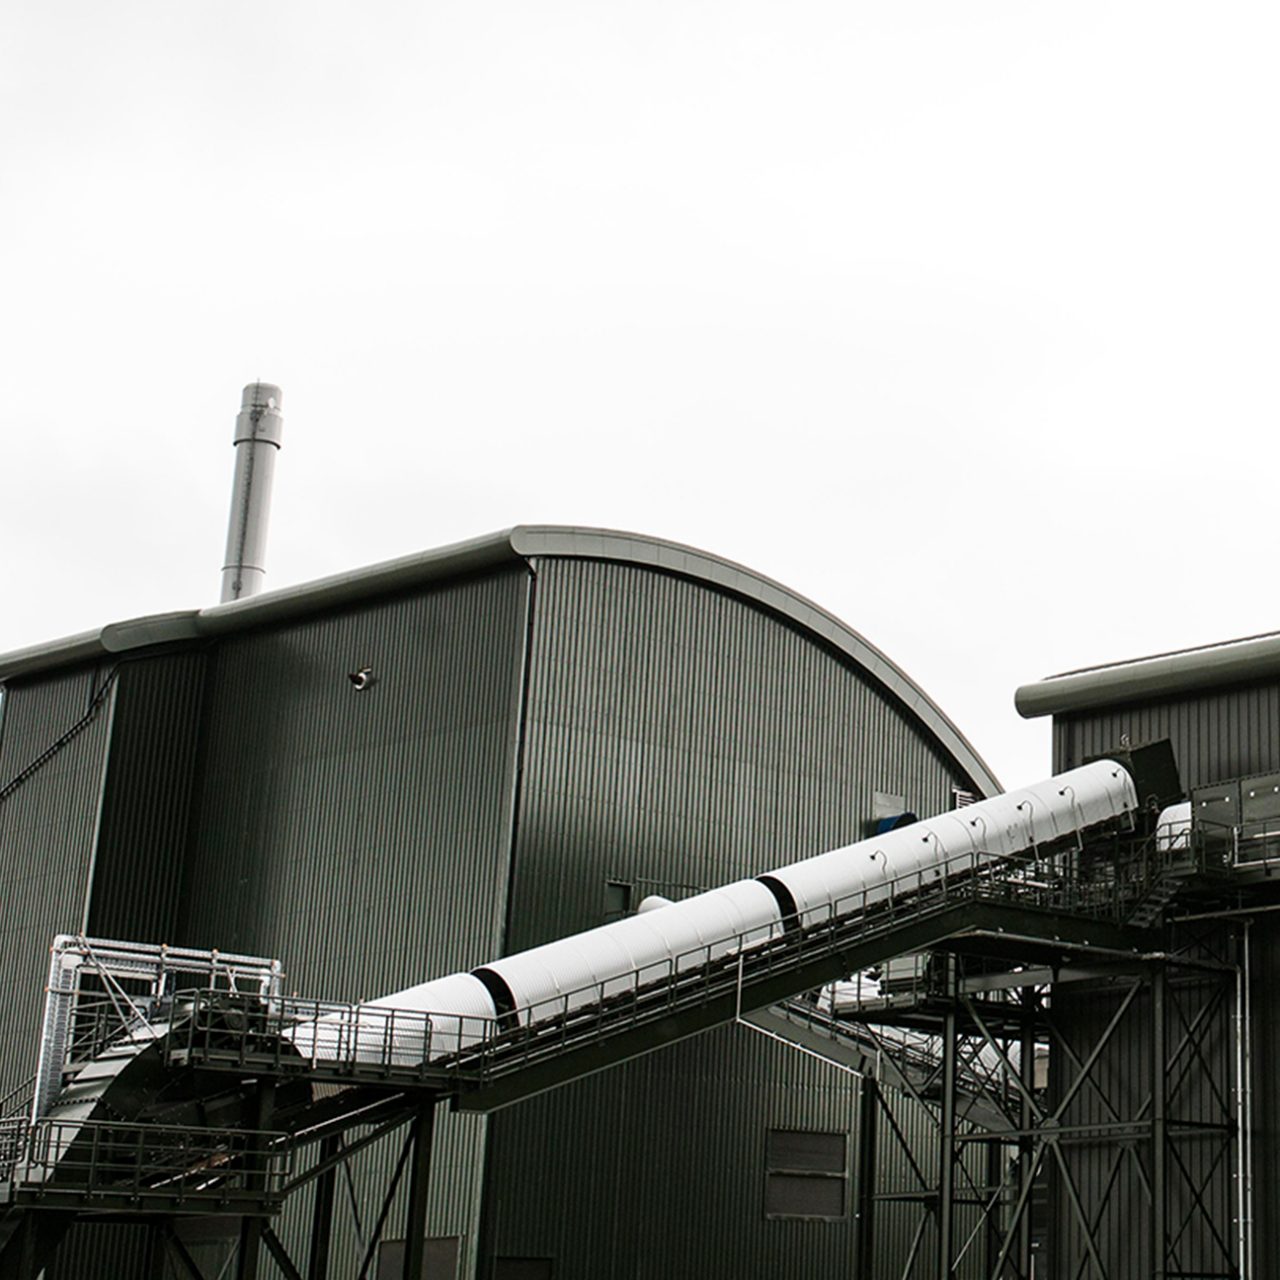 Exterior of the plant